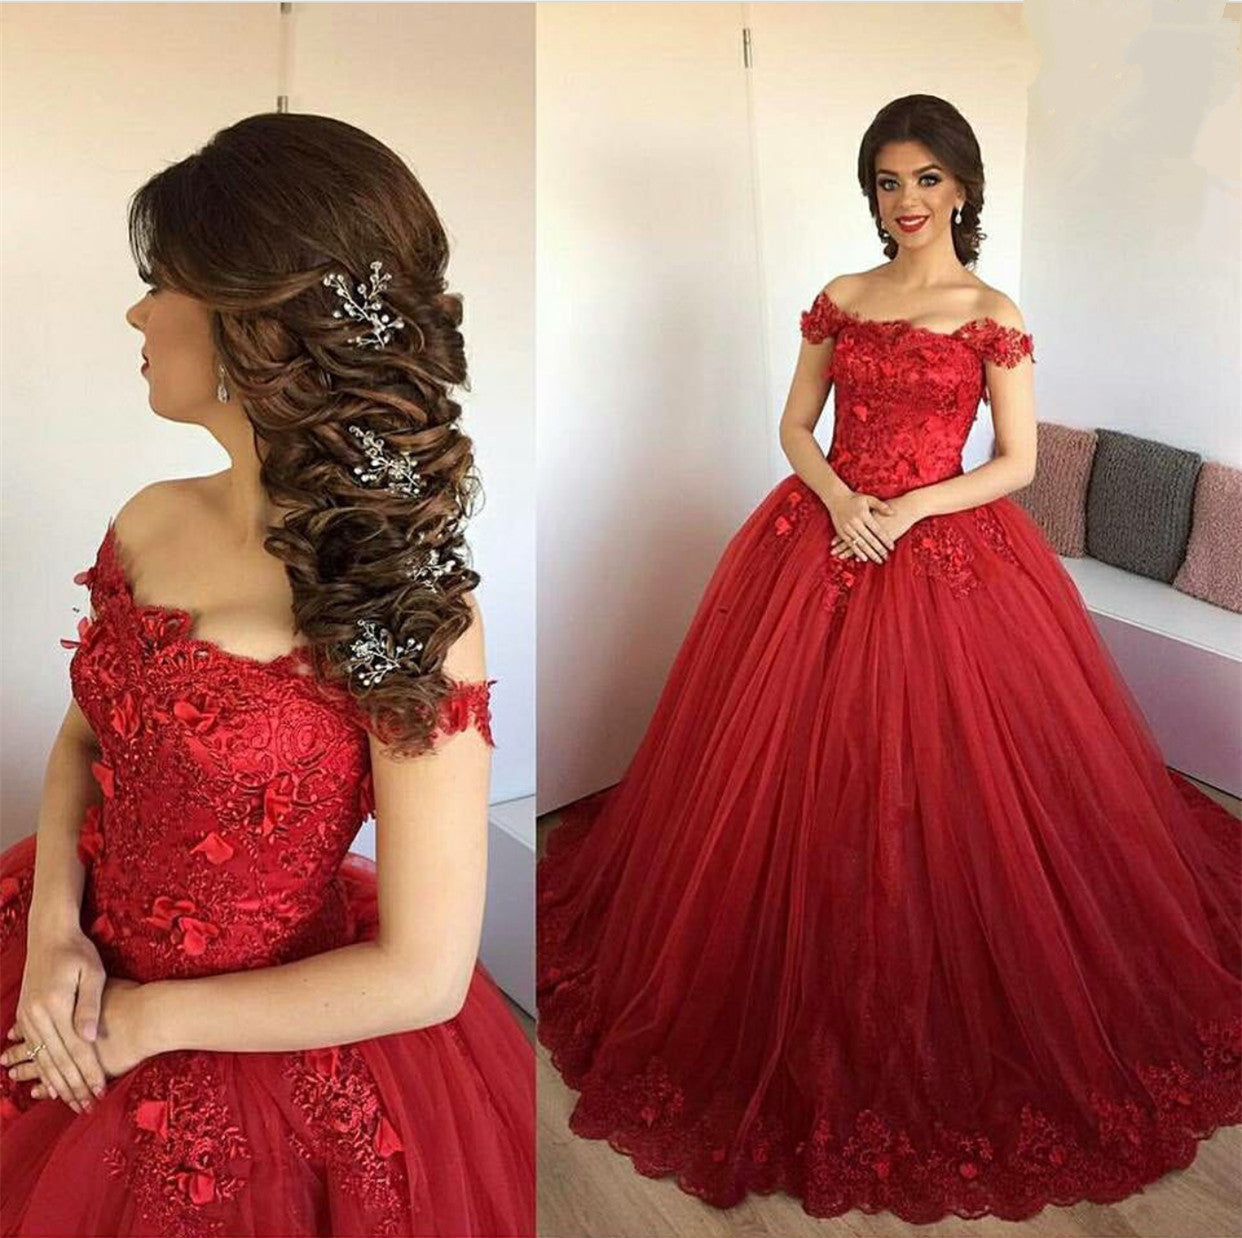 Modest / Simple Red Engagement Prom Dresses 2020 A-Line / Princess  Spaghetti Straps Sleeveless Floor-Length / Long Ruffle Backless Formal  Dresses